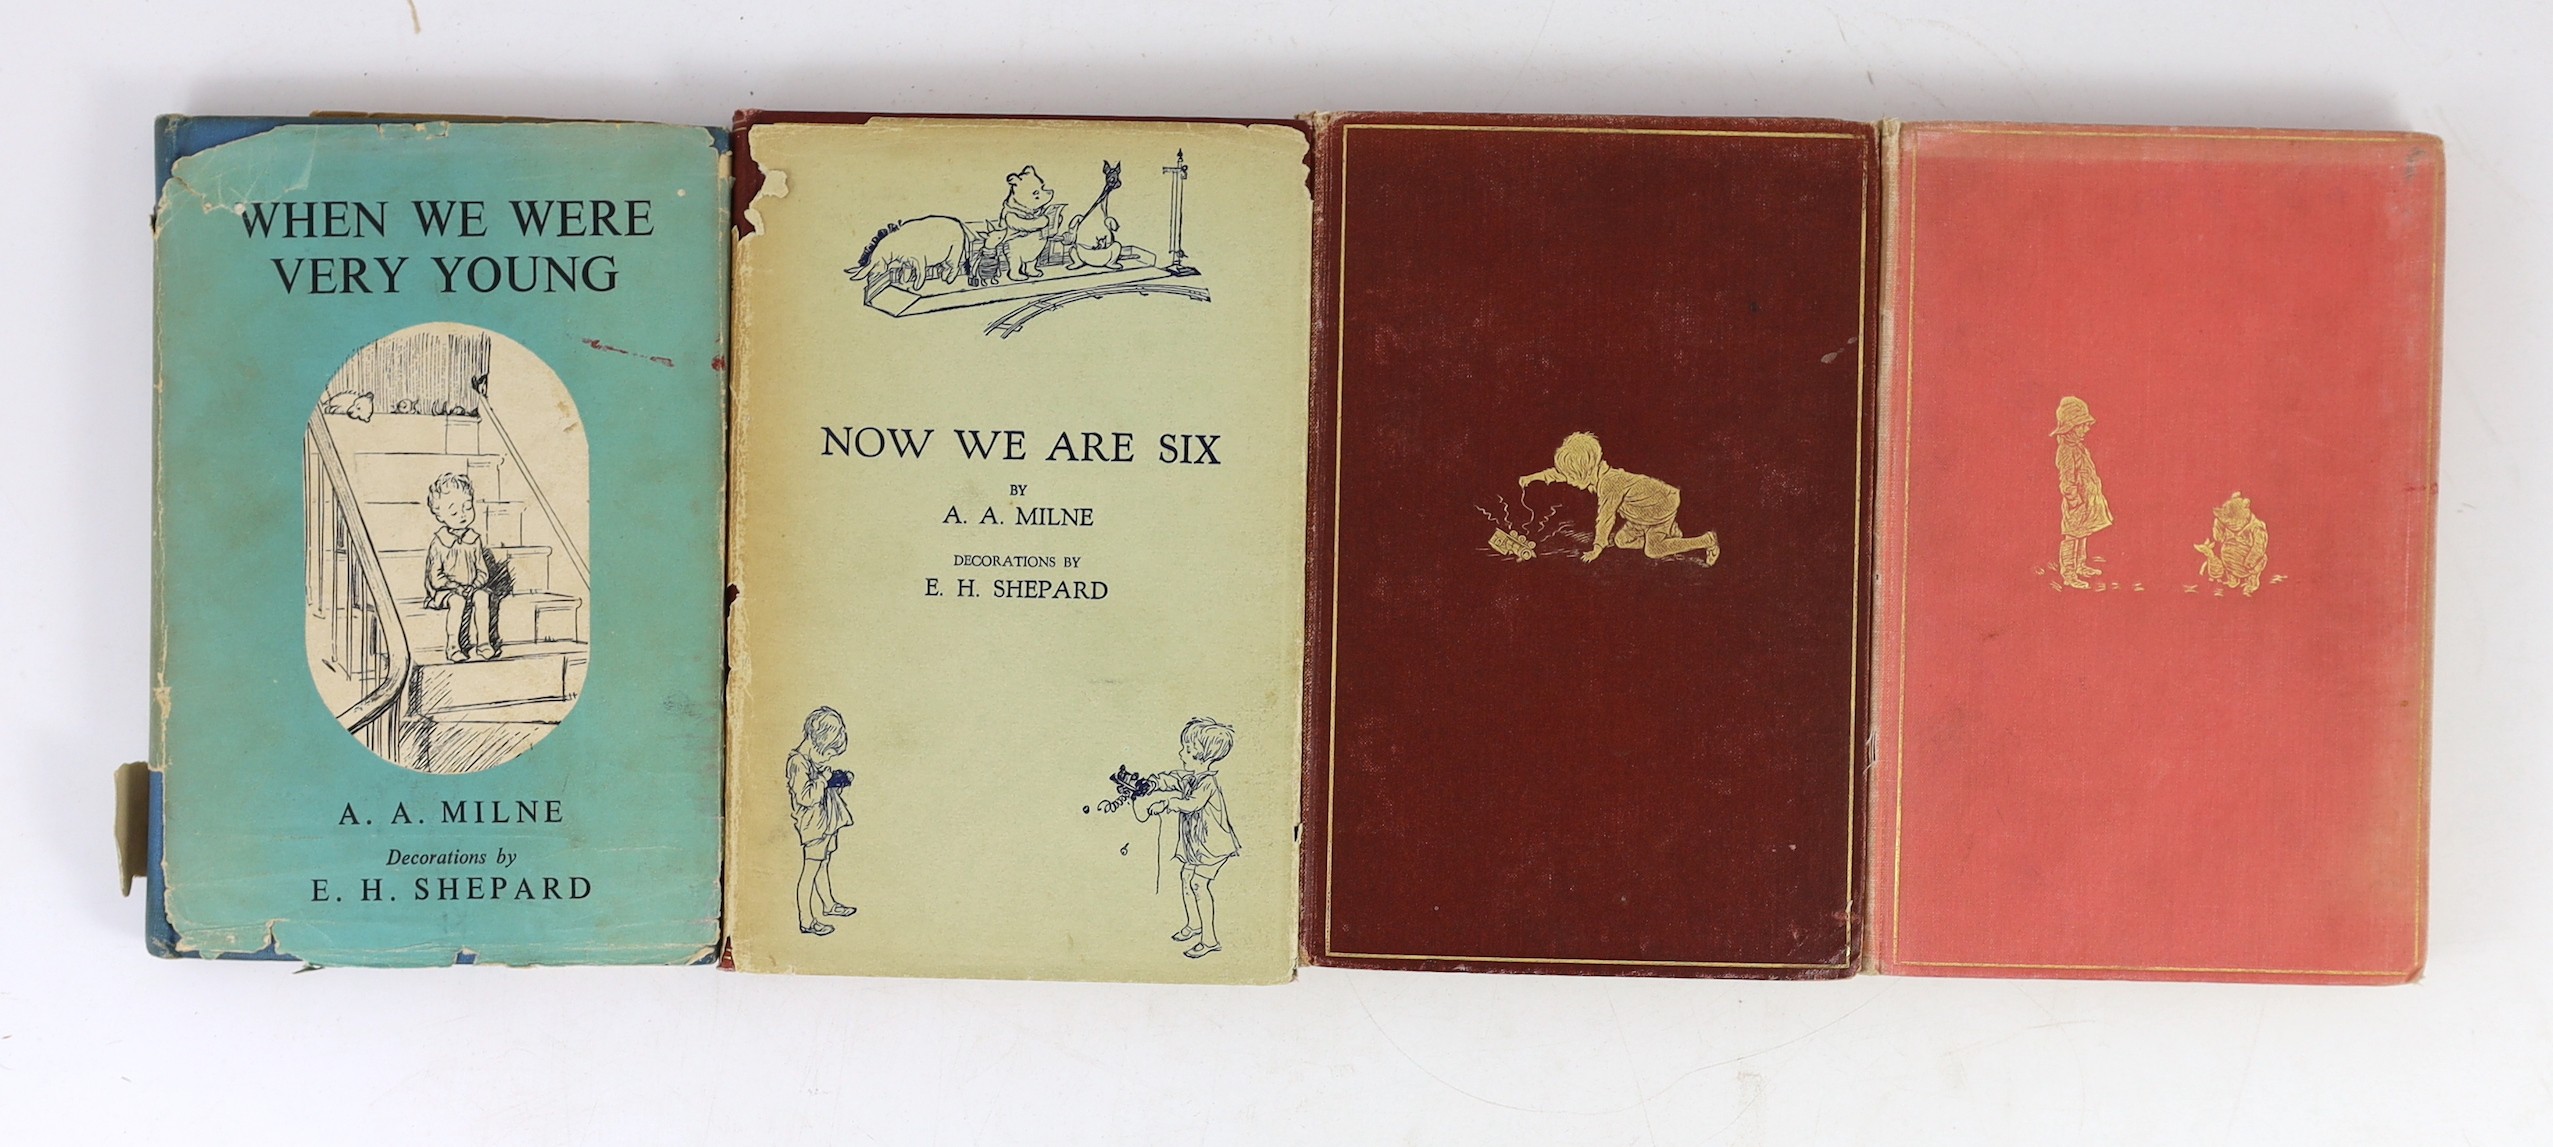 Milne, A. A - 7 works, all illustrated by Ernest Shepard - When We Were Very Young, 4th edition, 1924; Winnie-The-Pooh, 1st edition, 1926; The House at Pooh Corner, 2 copies, both 1st editions, 1928; Now We Are Six, 2 co